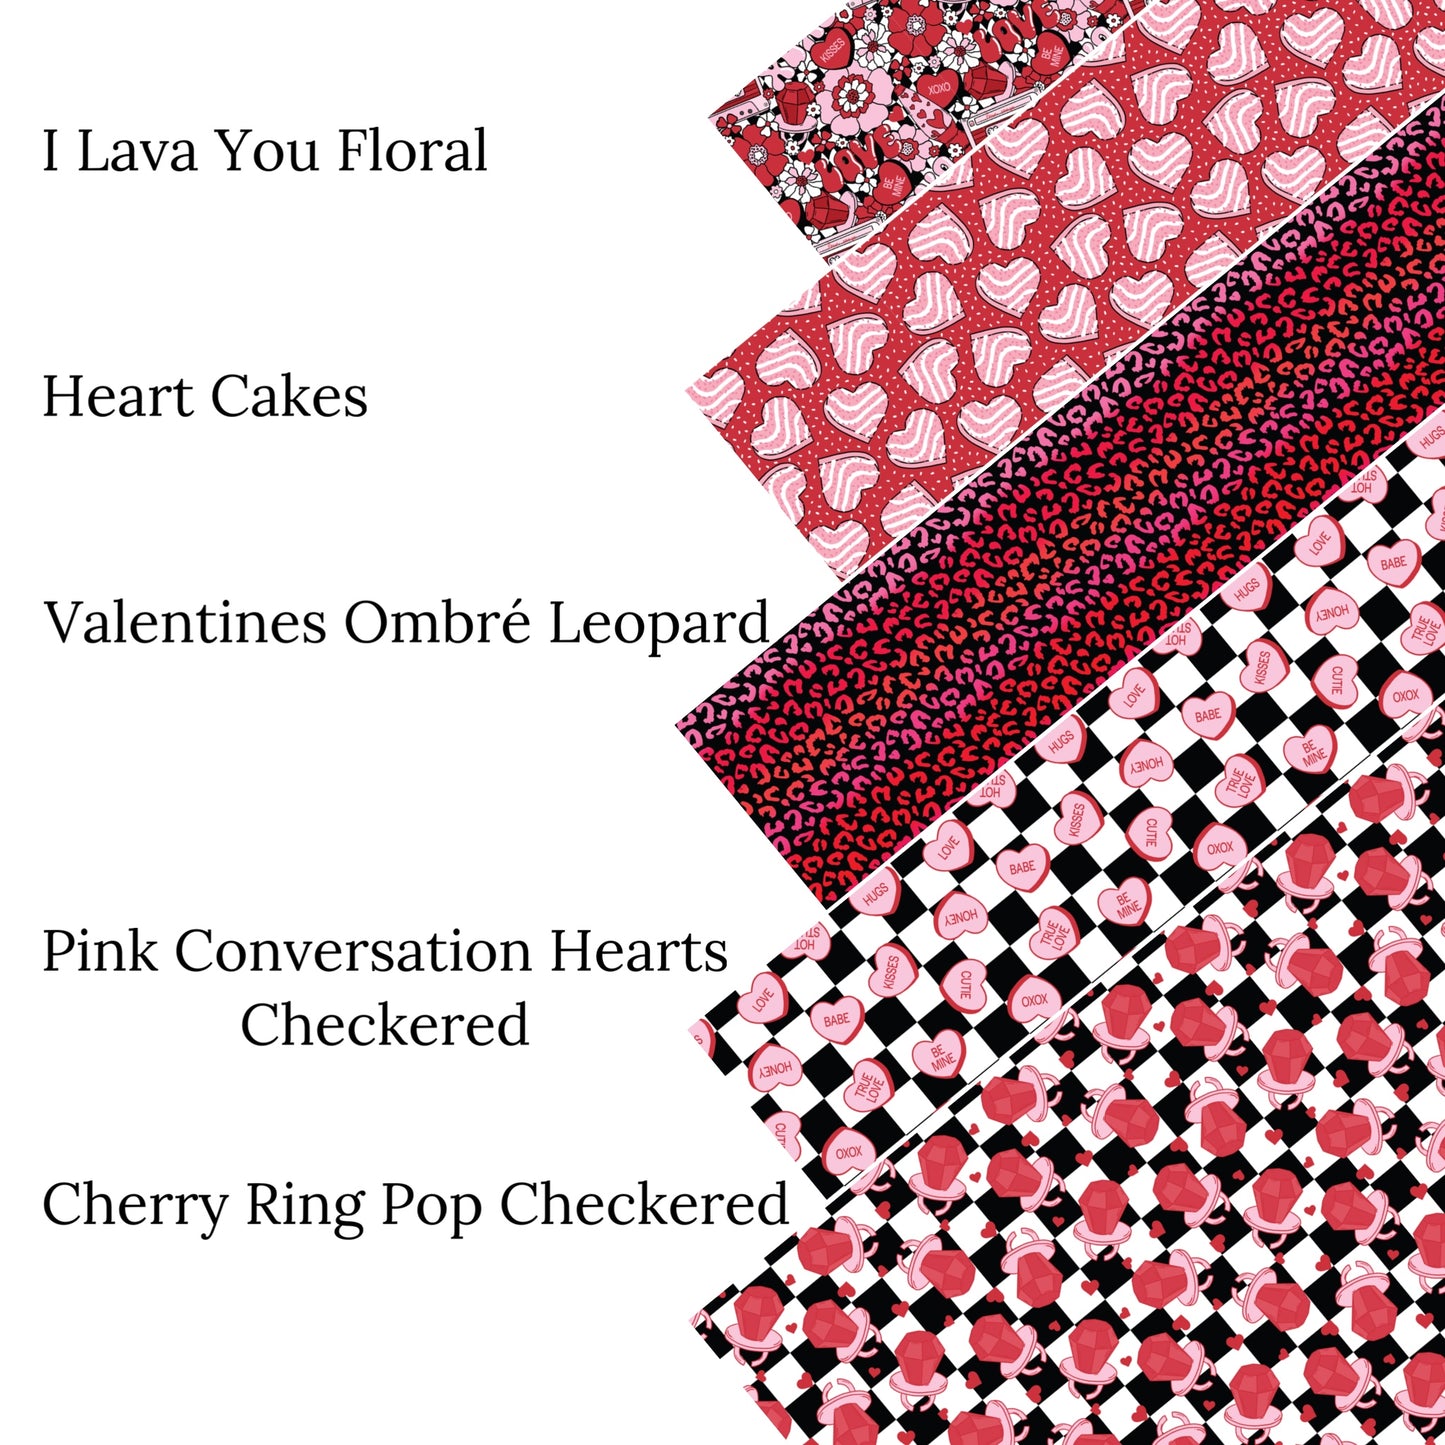 Valentine’s Ombre Leopard Faux Leather Sheets